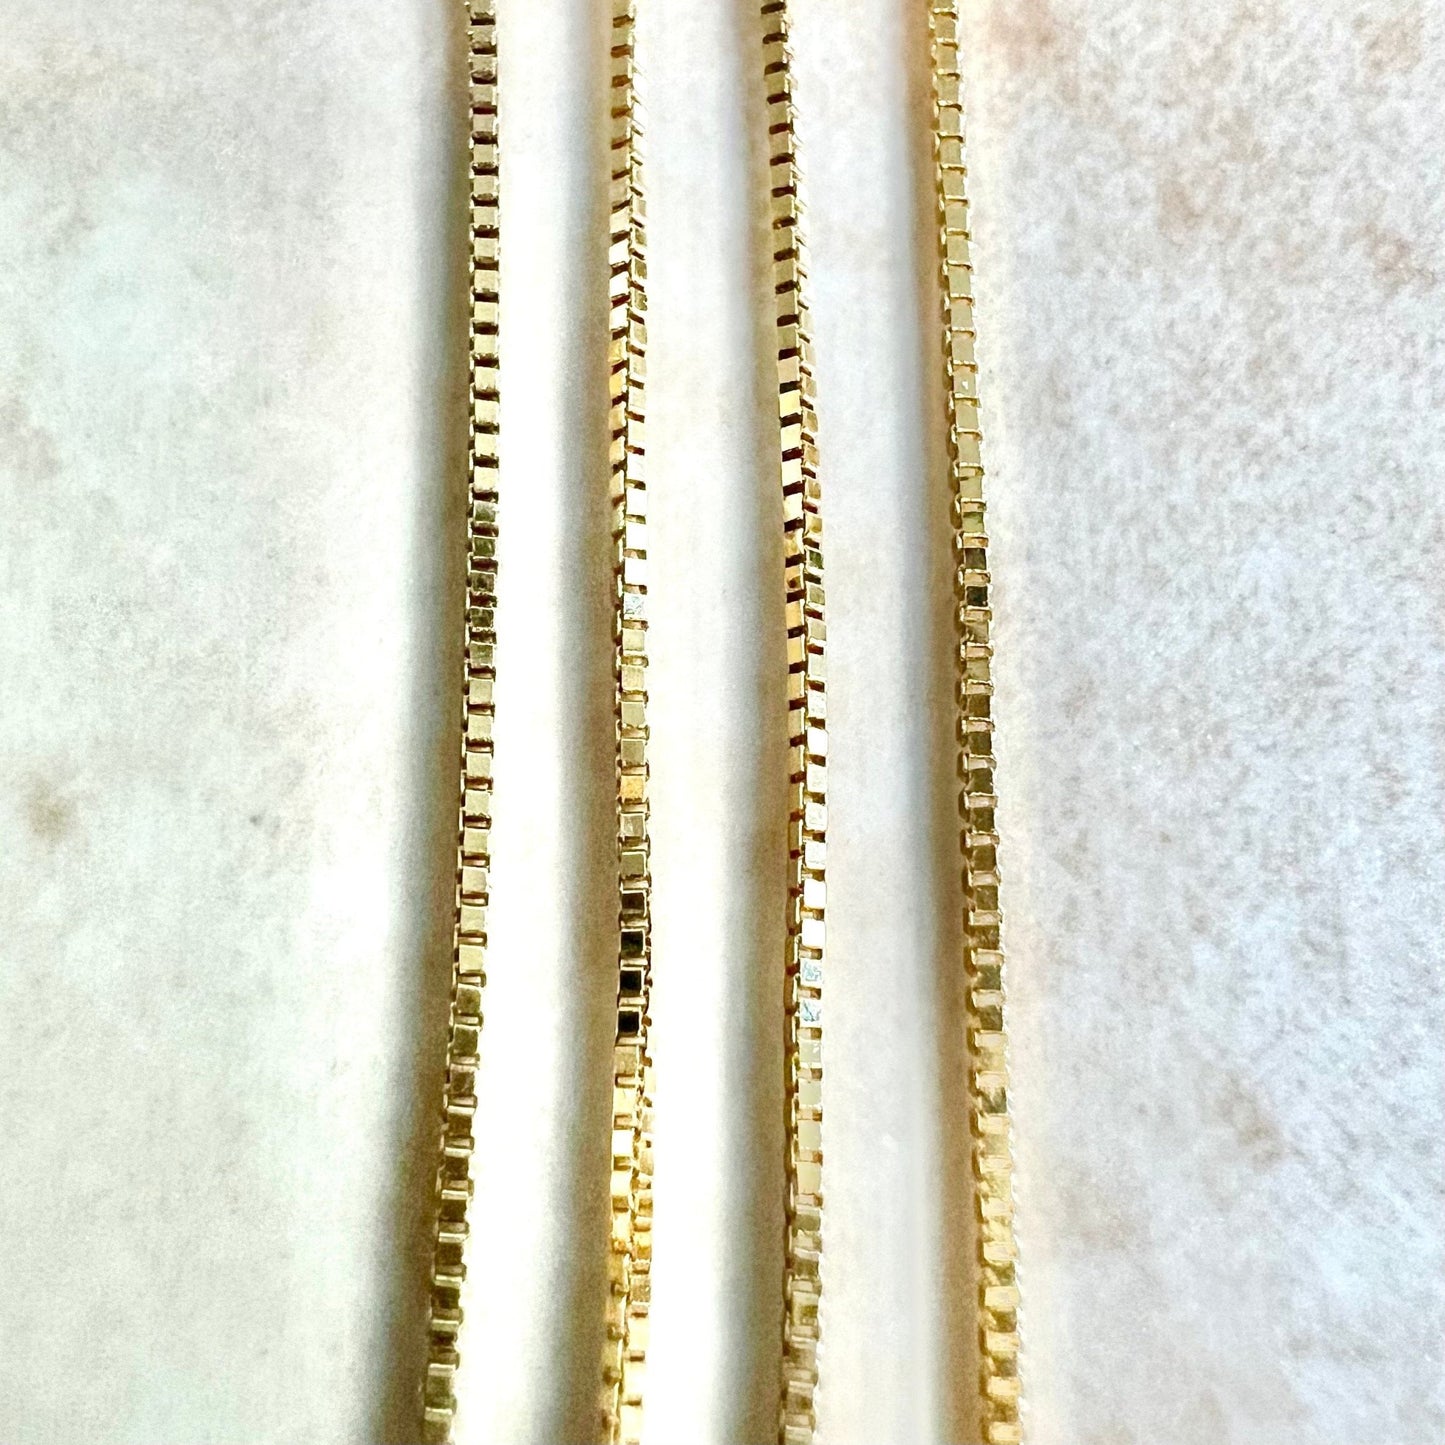 Lightweight 14K Yellow Gold Box Chain Necklace - 16 Inch Gold Chain Necklace - Yellow Gold Necklace - Gifts For Her - Minimalist Necklace